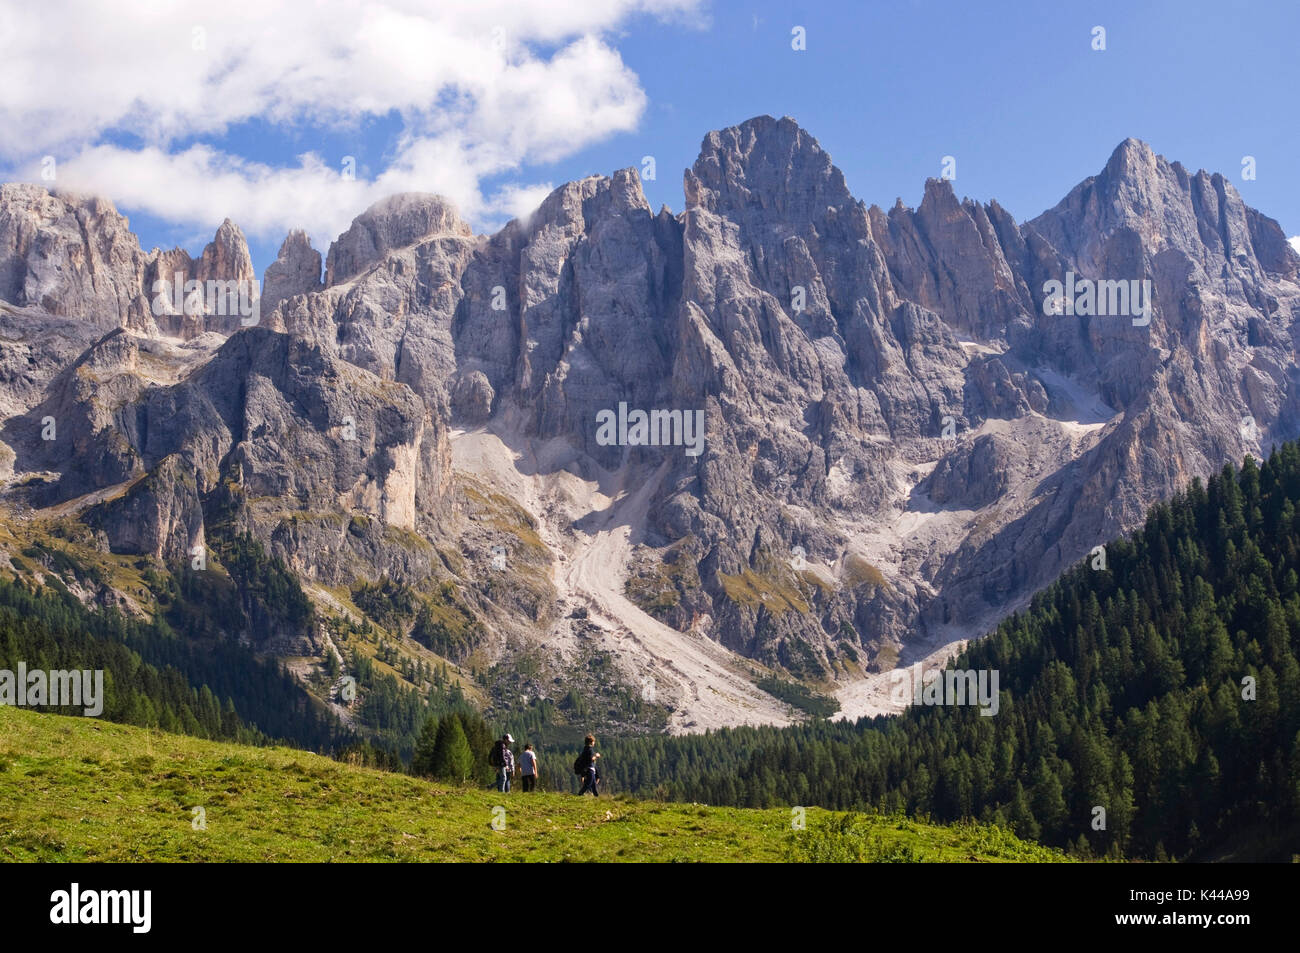 Europe, Italy, Trentino region, Trento district, Val Venegia. Landscape of St. Martino Pale and hikers. Stock Photo